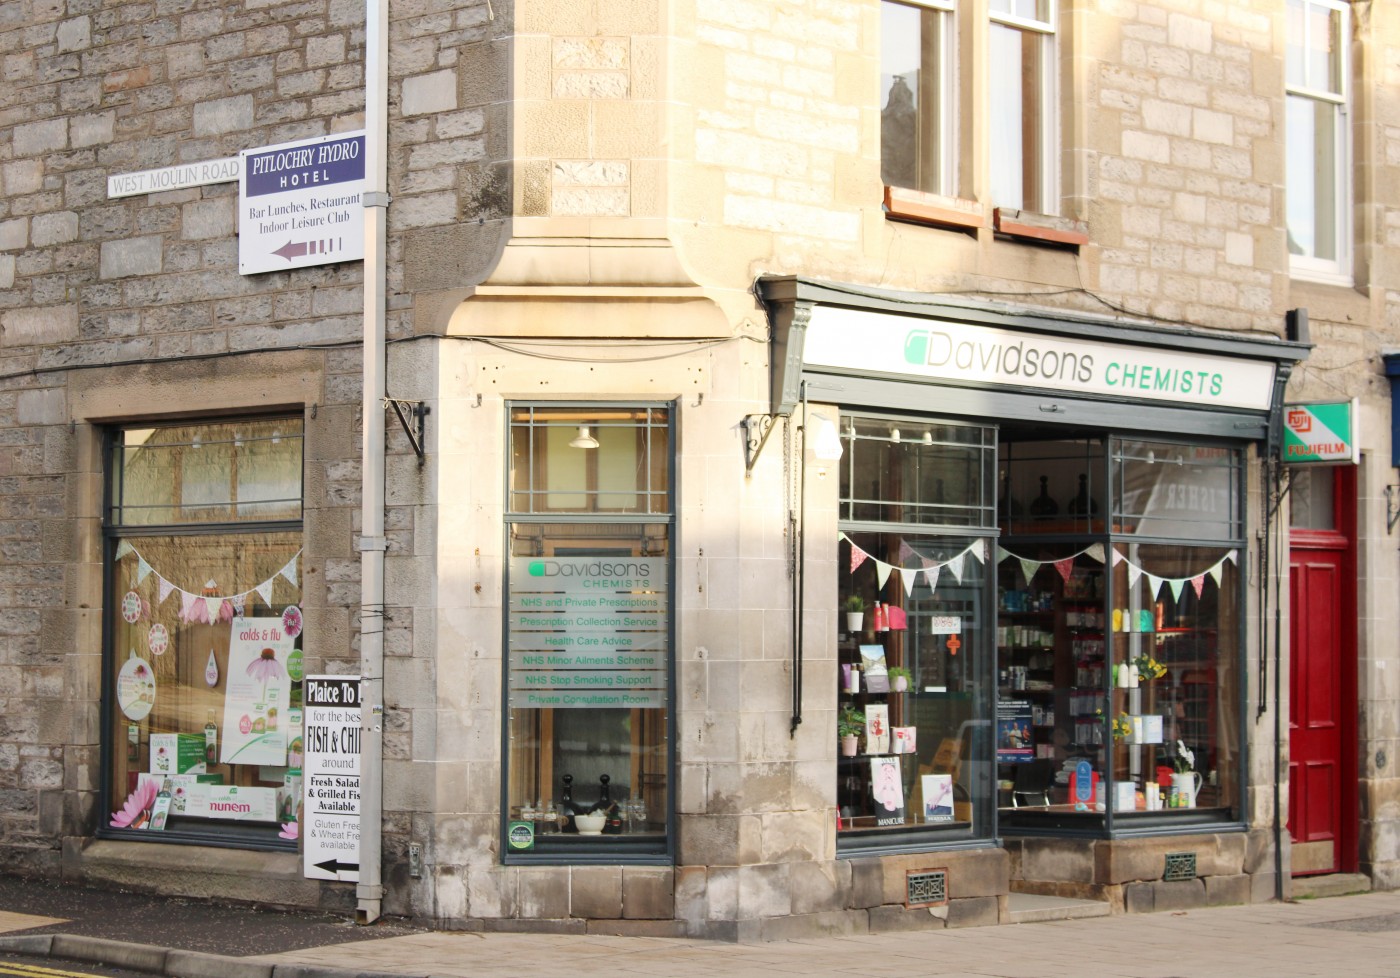 Davidsons Chemists and Pharmacy essential amenities shop based in Pitlochry town centre.